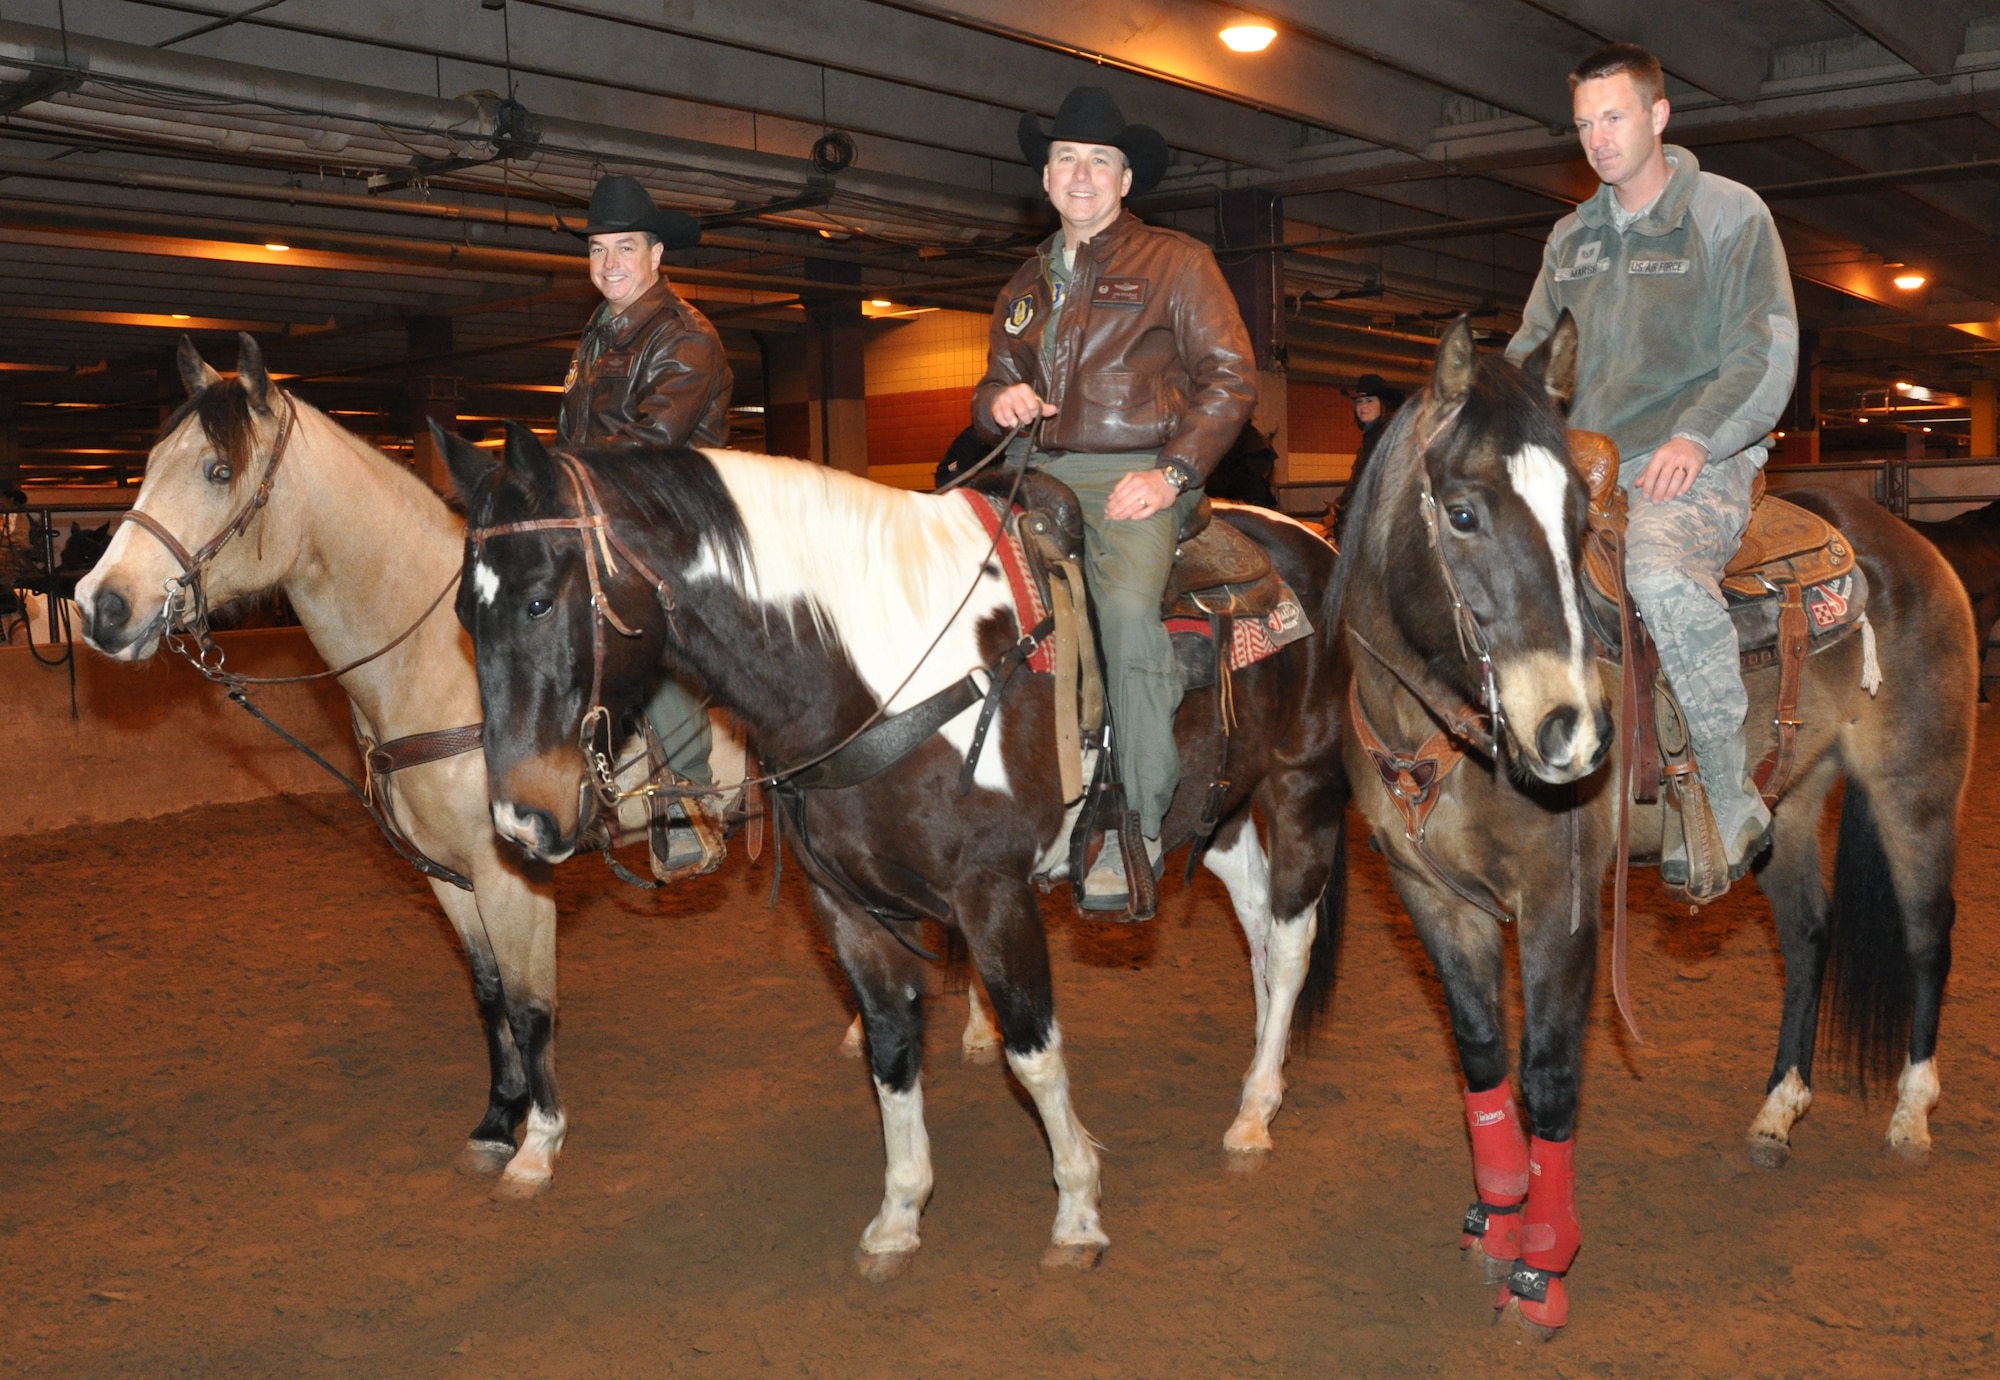 It was an exciting day at Fort Worth Stock Show and Rodeo's Military Appreciation Day yesterday. Col. John Breazeale, 301st Fighter Wing commander, Col. Chris Yancy, 301st FW vice commander, and Tech. Sgt. Larry Marsh, 301st FW's 2013 NCO of the Year, rode in the grand entry prior to enjoying the sights and sounds of this historic annual event. (U.S. Air Force photo/Master Sgt. Julie Briden-Garcia)